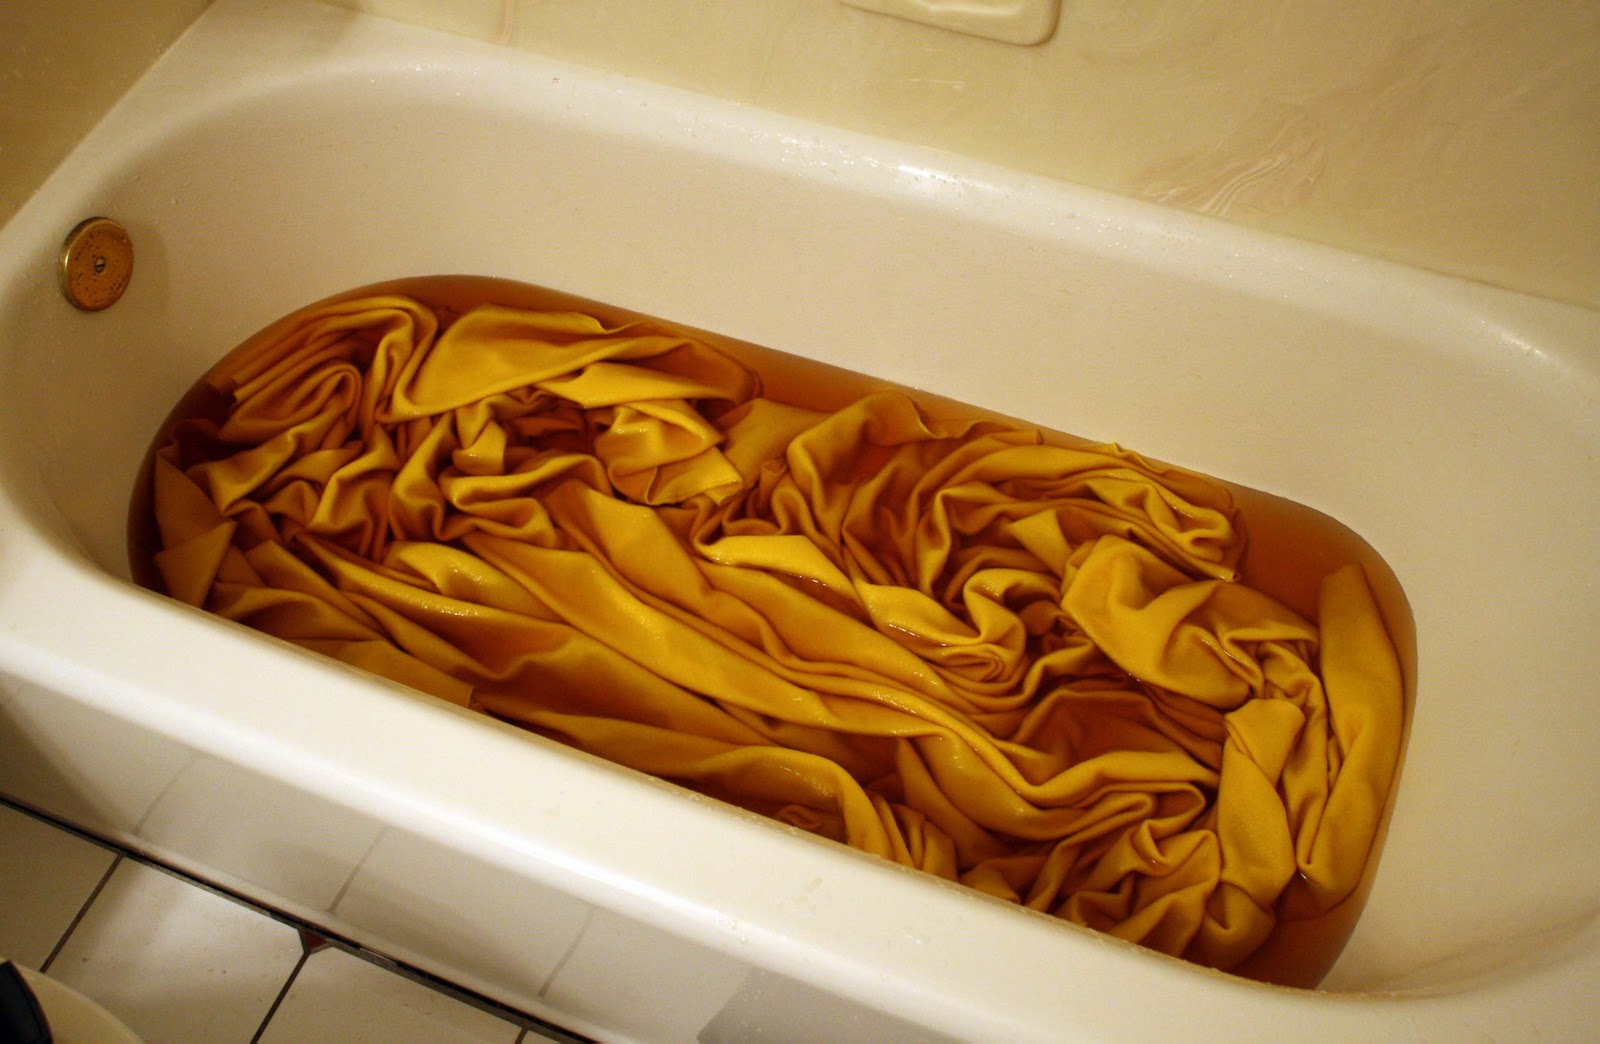 How To Get Fabric Dye Out Of Bathtub